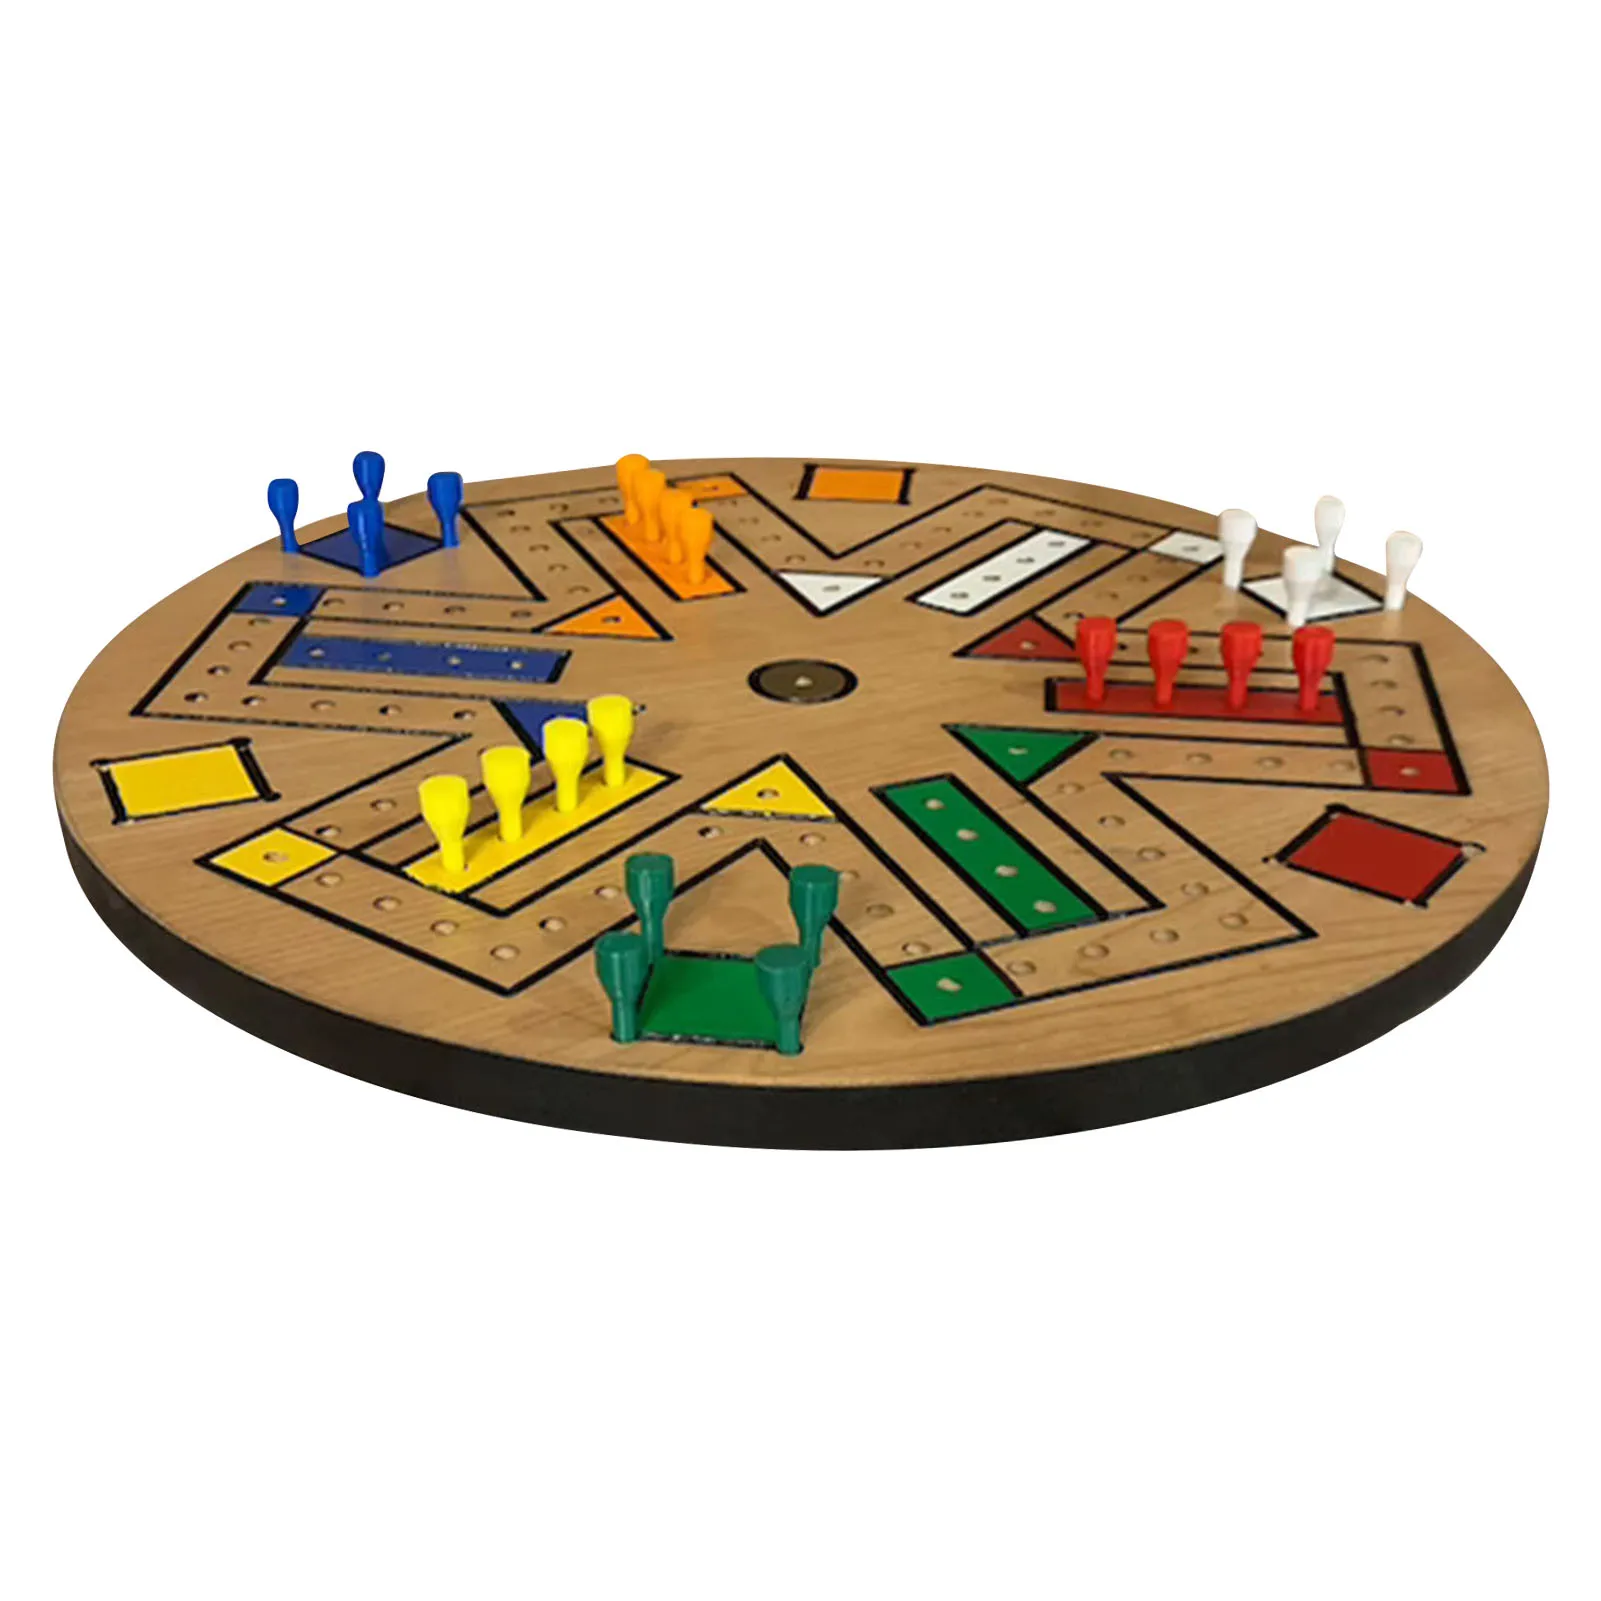 

Fast Track Game Night Fast Track Board Game Sided Painted Wooden Fast Track Board Game For 3-6 Players 6 Colors 24 Chess Pieces